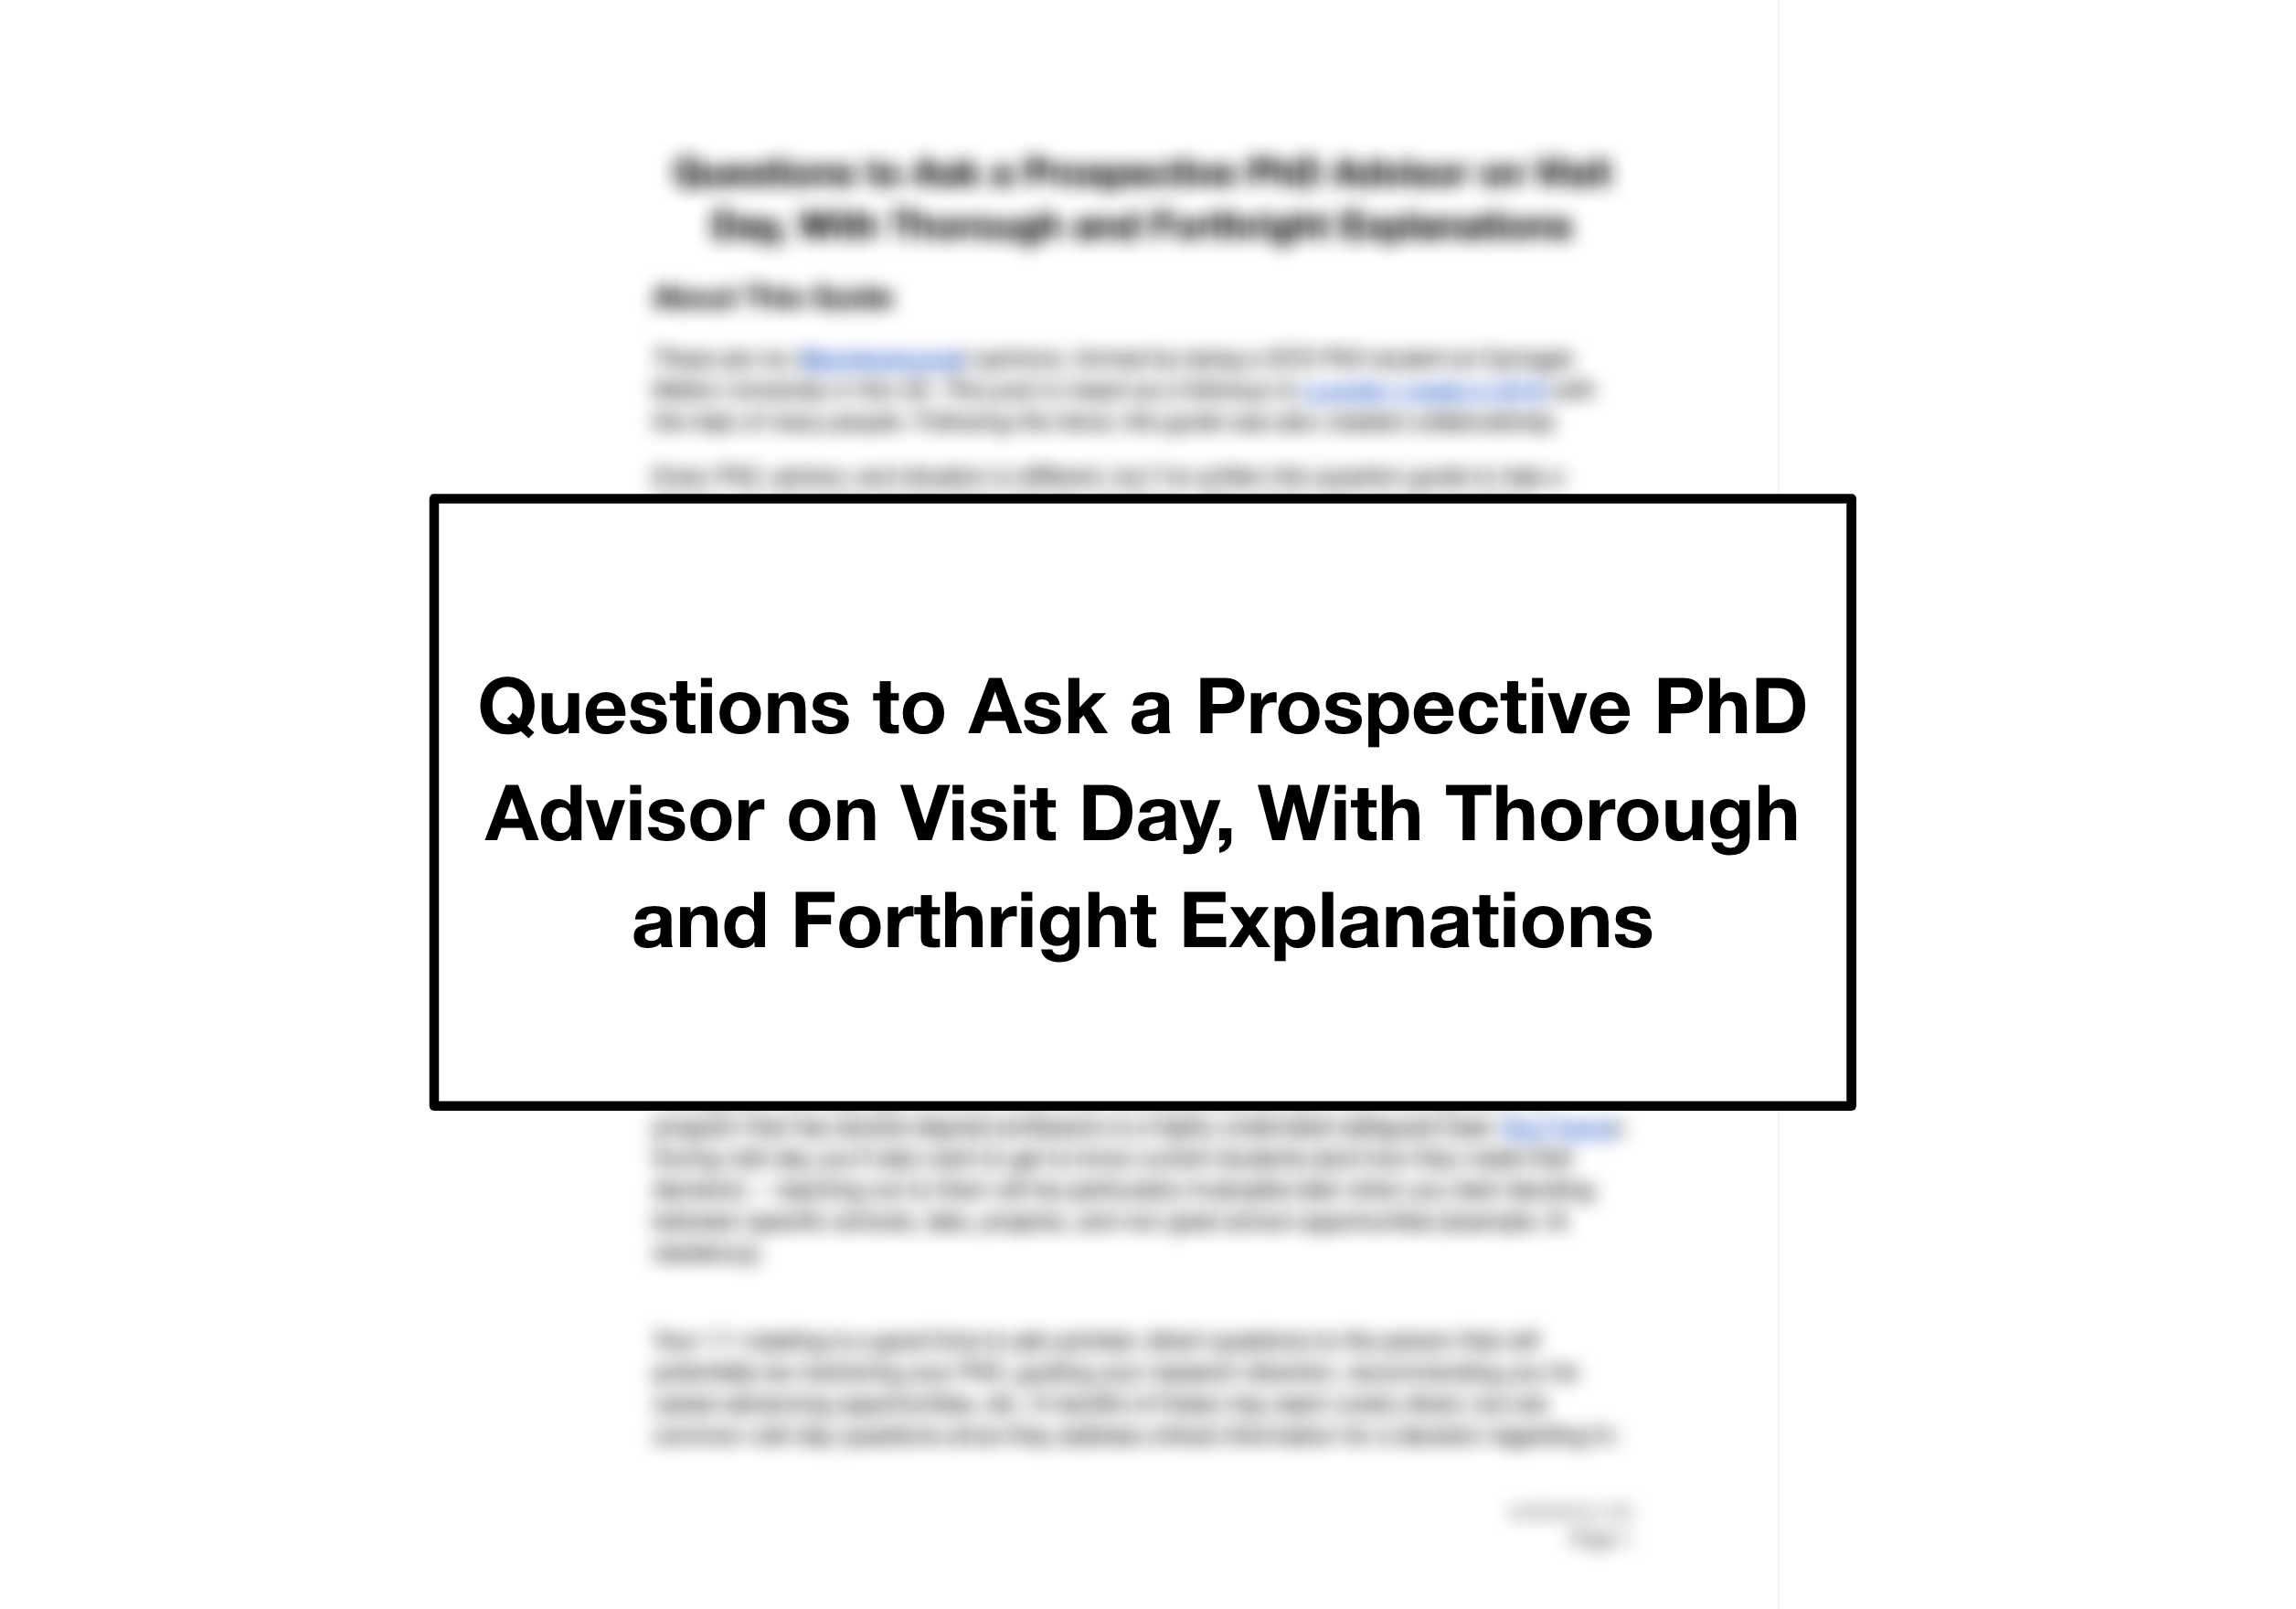 Questions to Ask a Prospective Ph.D. Advisor on Visit Day ...